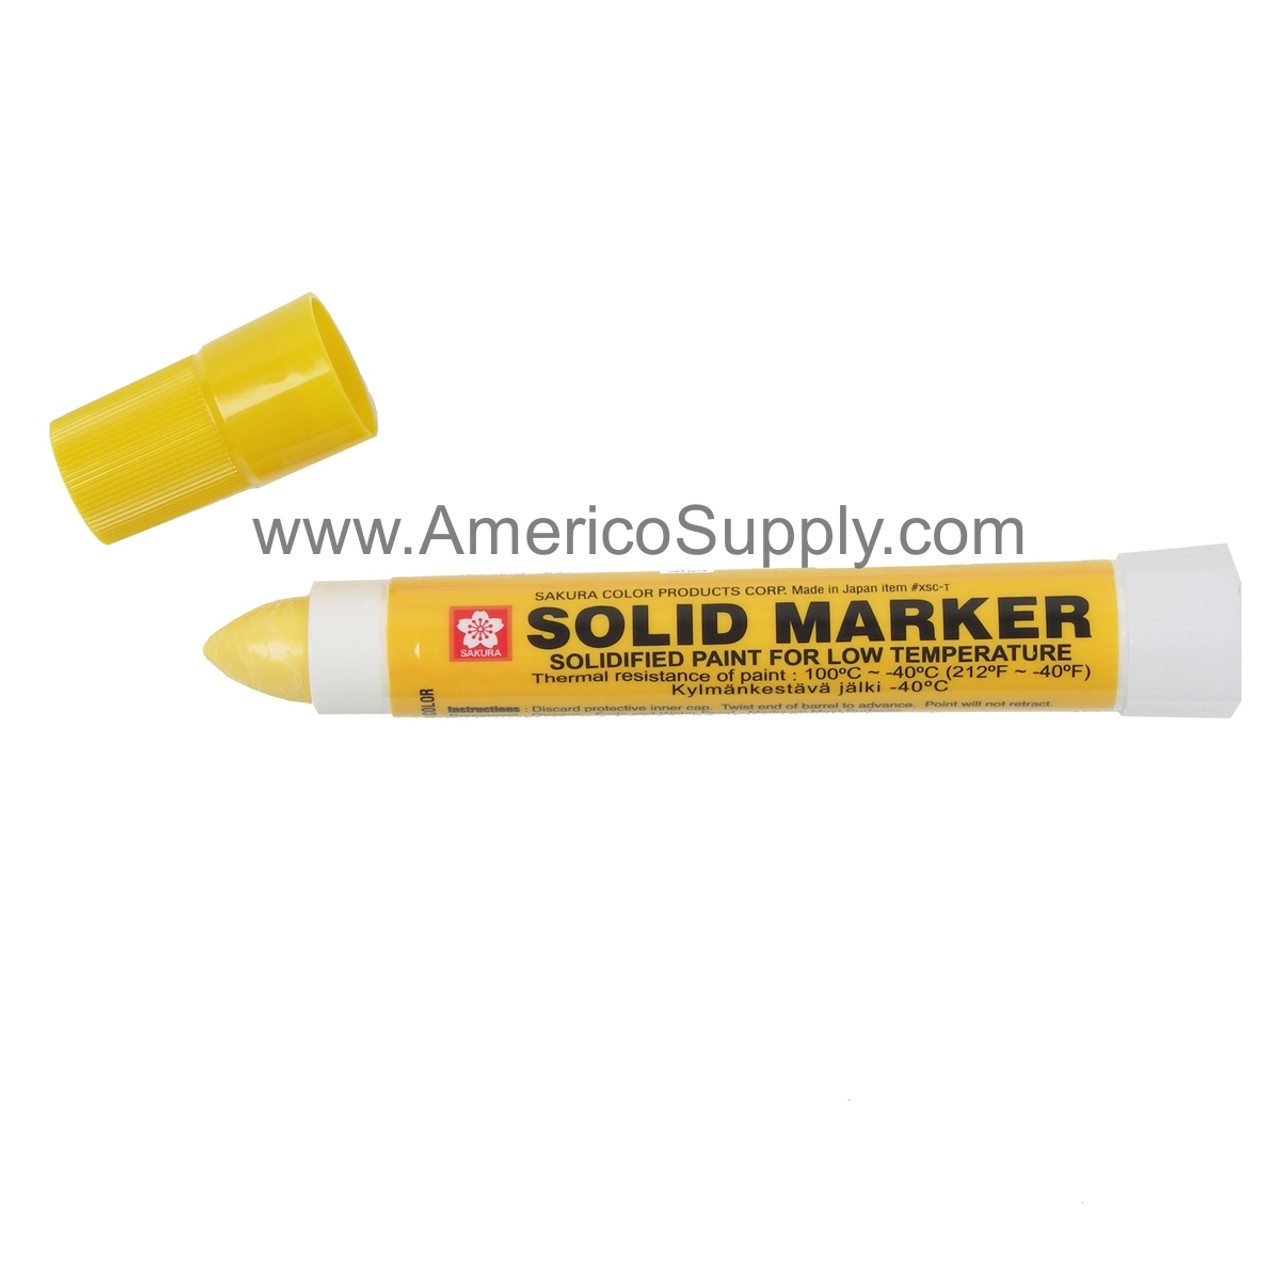 SOLID MARKER LT - LOW TEMPERATURE YELLOW